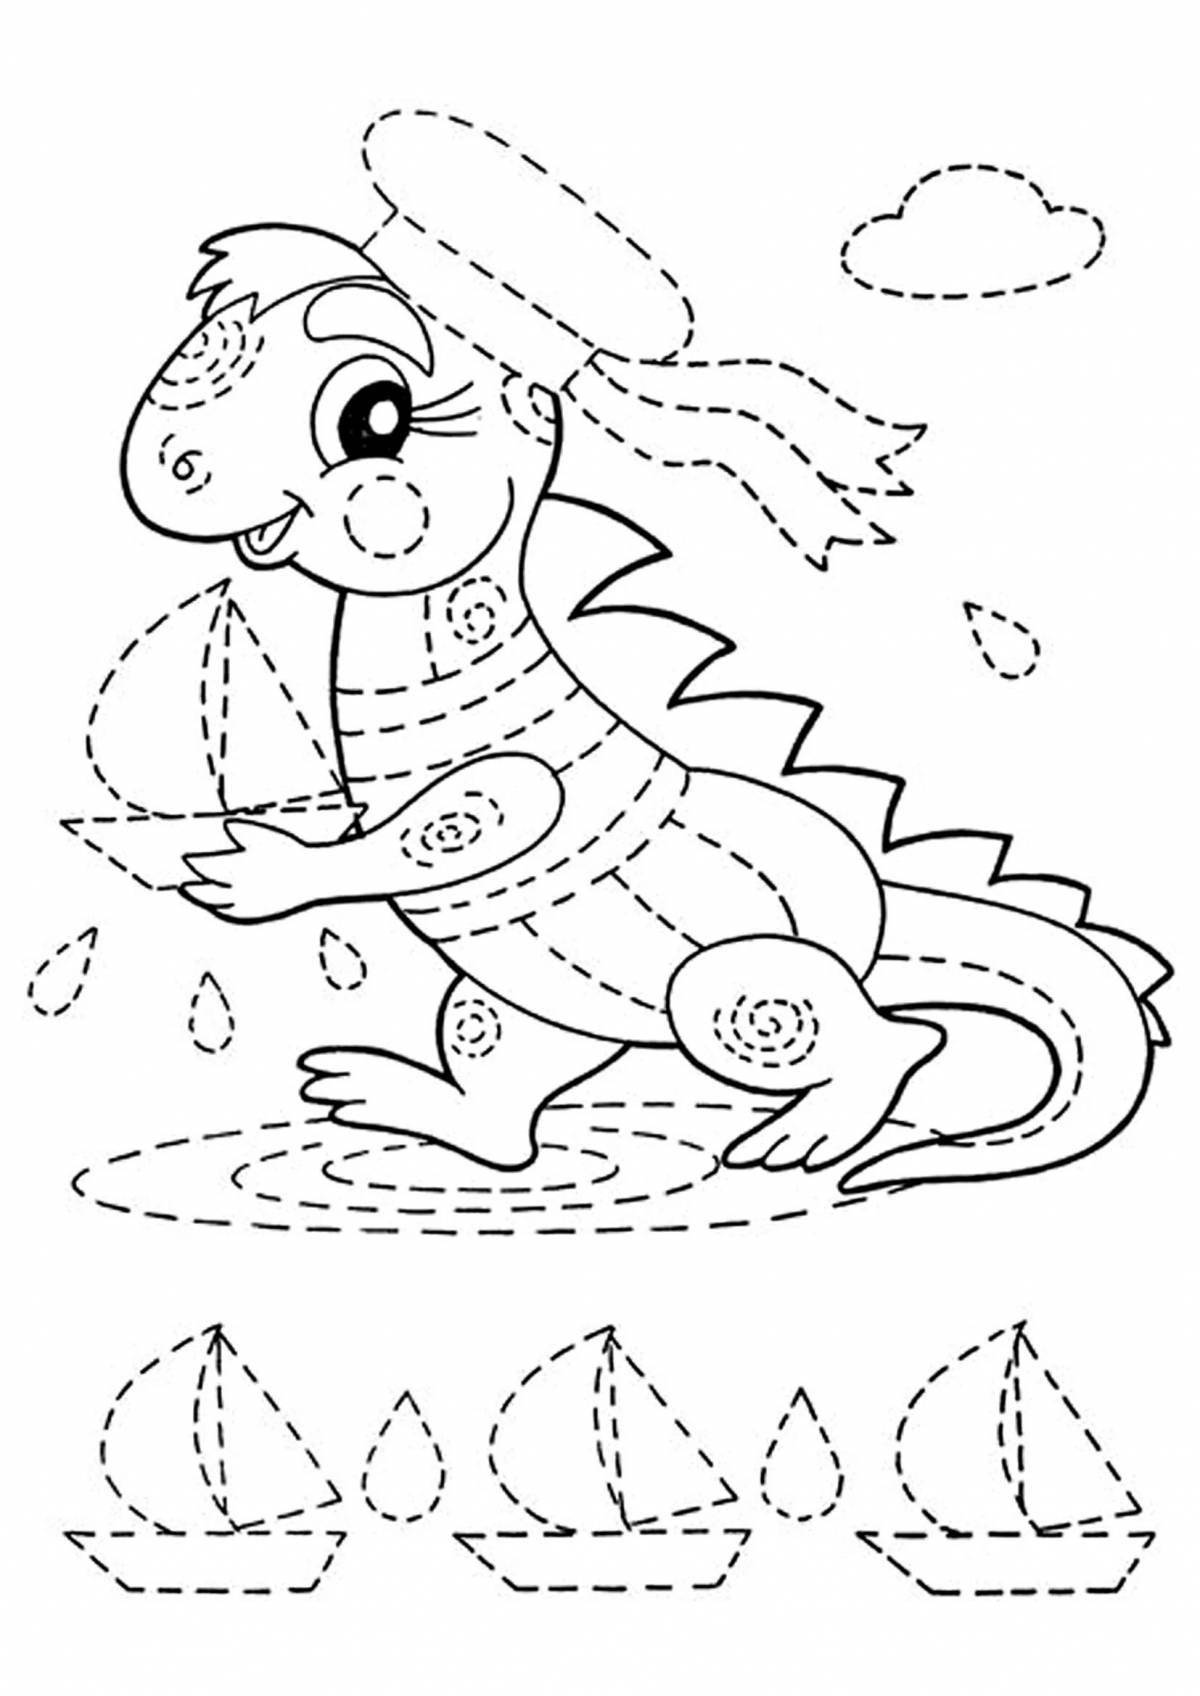 Creative dotted coloring pages for kids